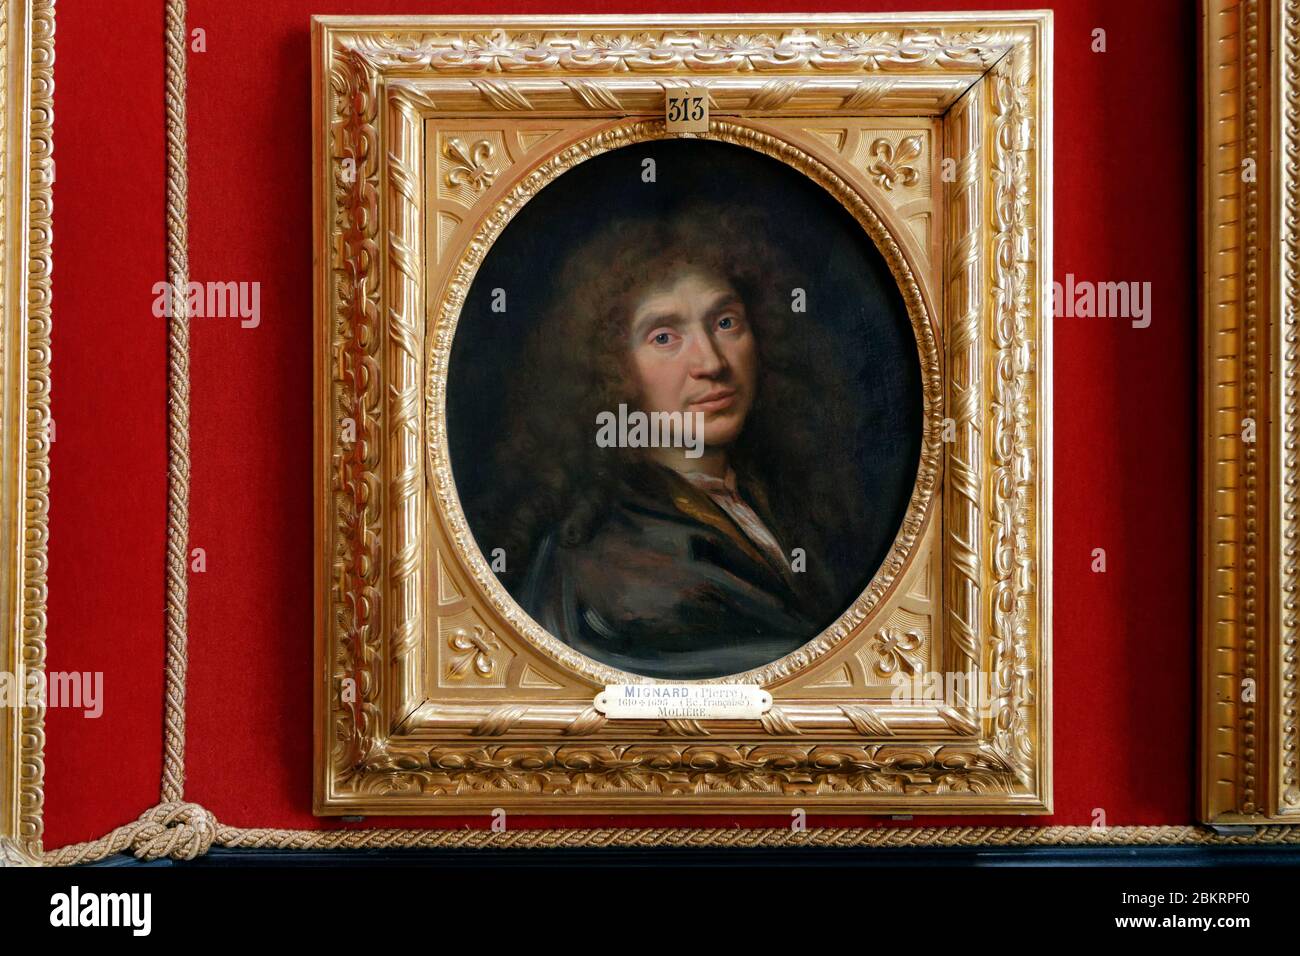 France, Oise, Chantilly, Chantilly, estate, Chantilly castle and Conde museum, Tribune, Moliere of Pierre MIgnard Stock Photo